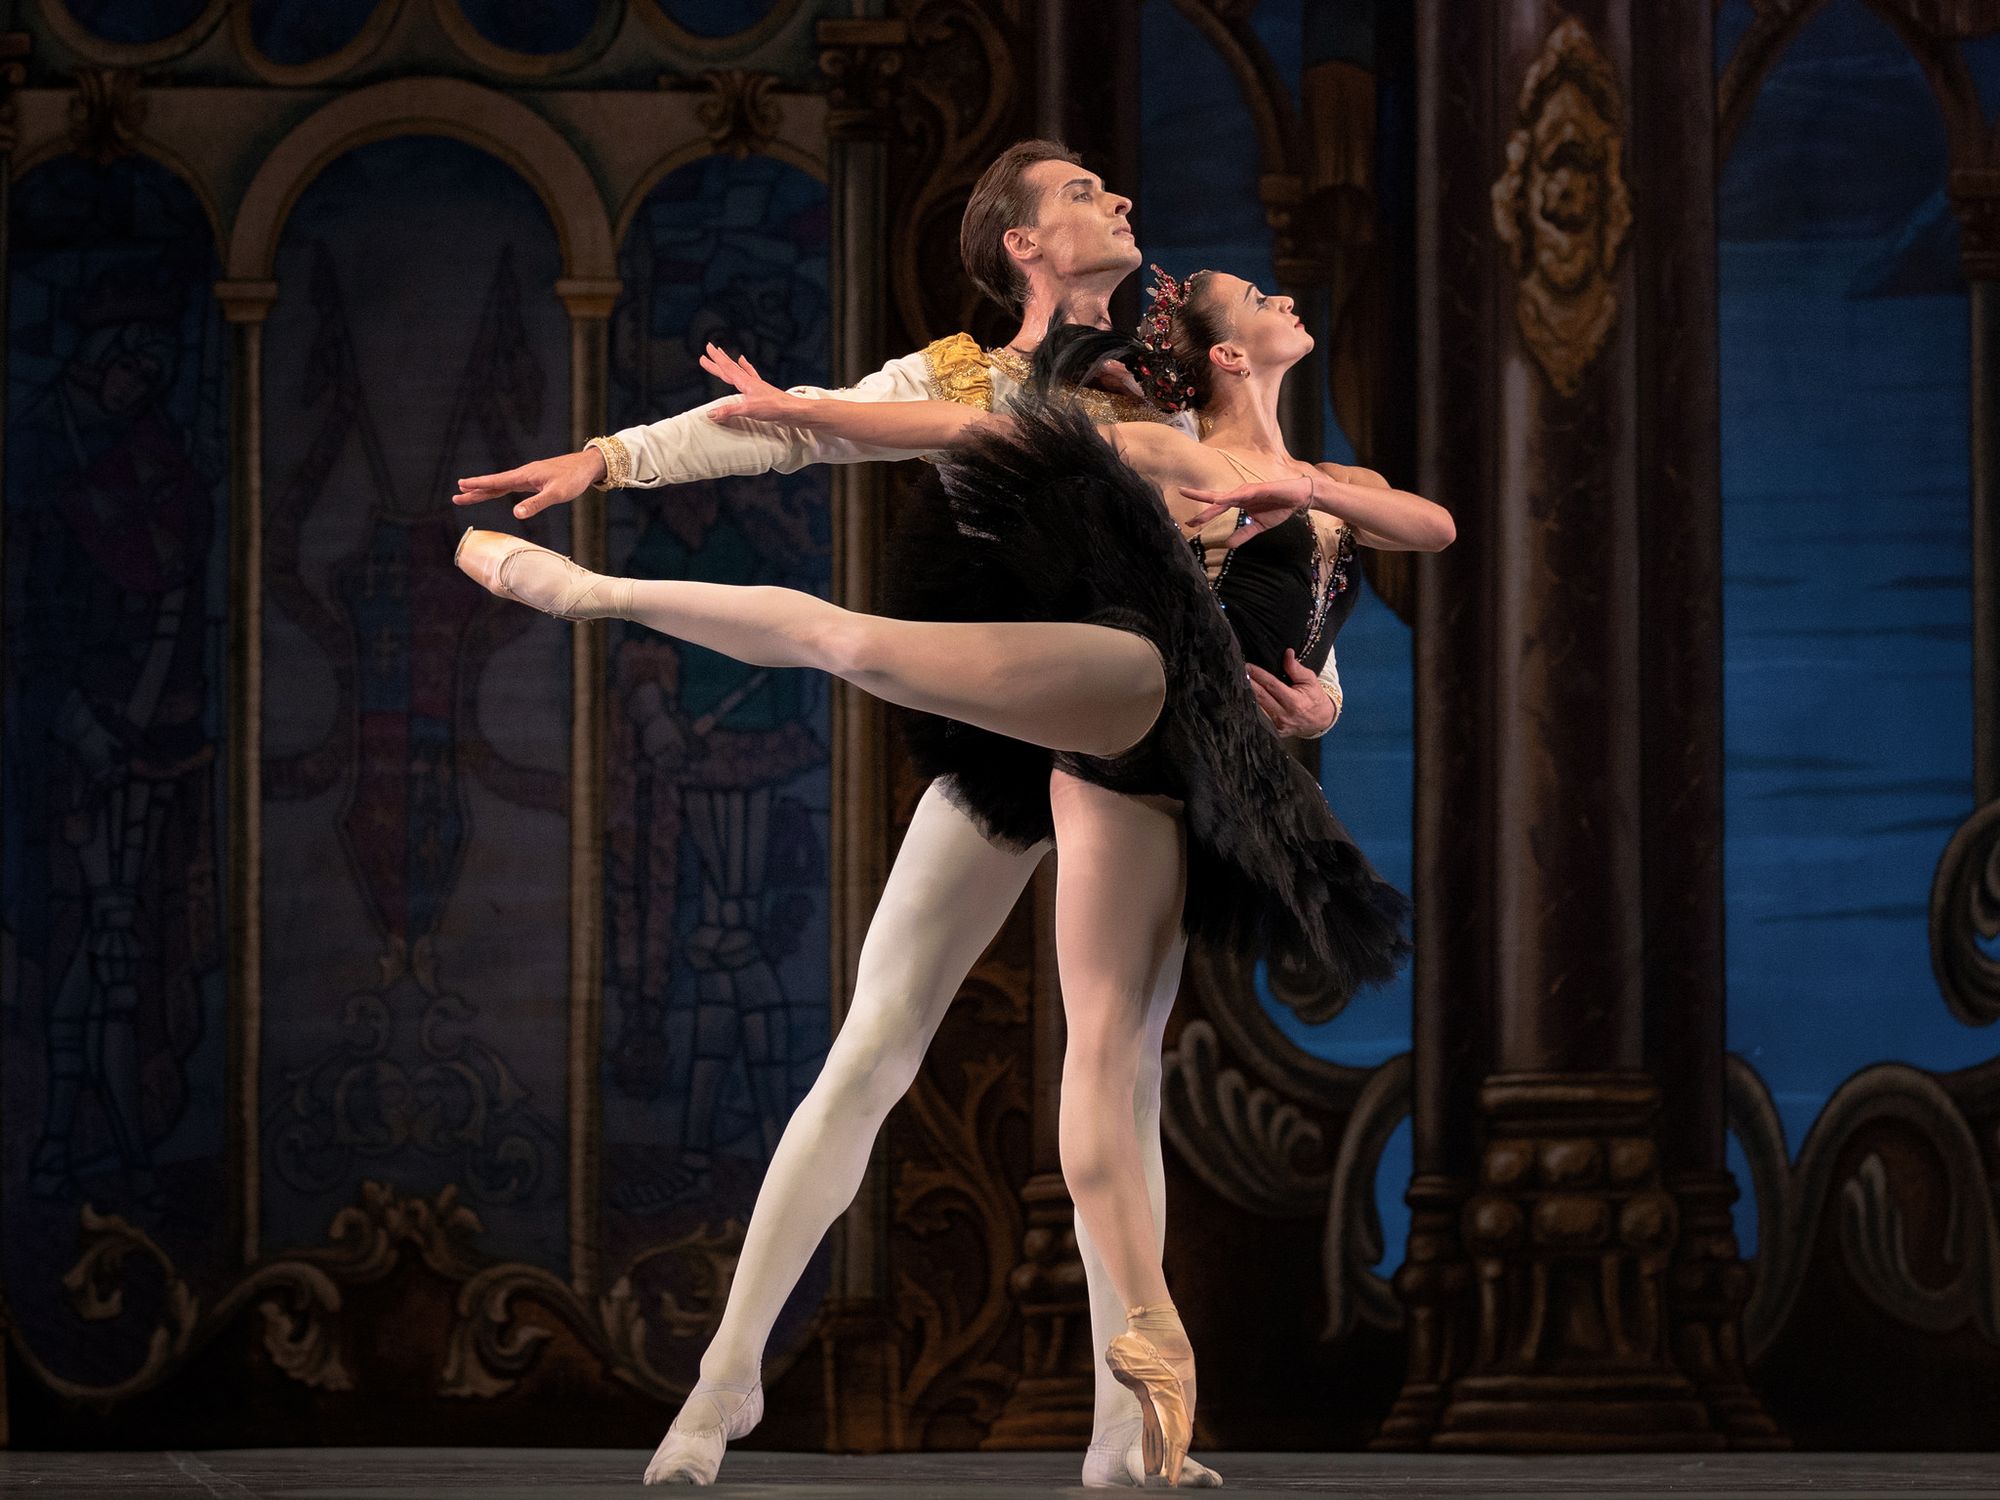 “Swan Lake” Scintillates as the Kings Gets a Dash of Ukraine Tradition